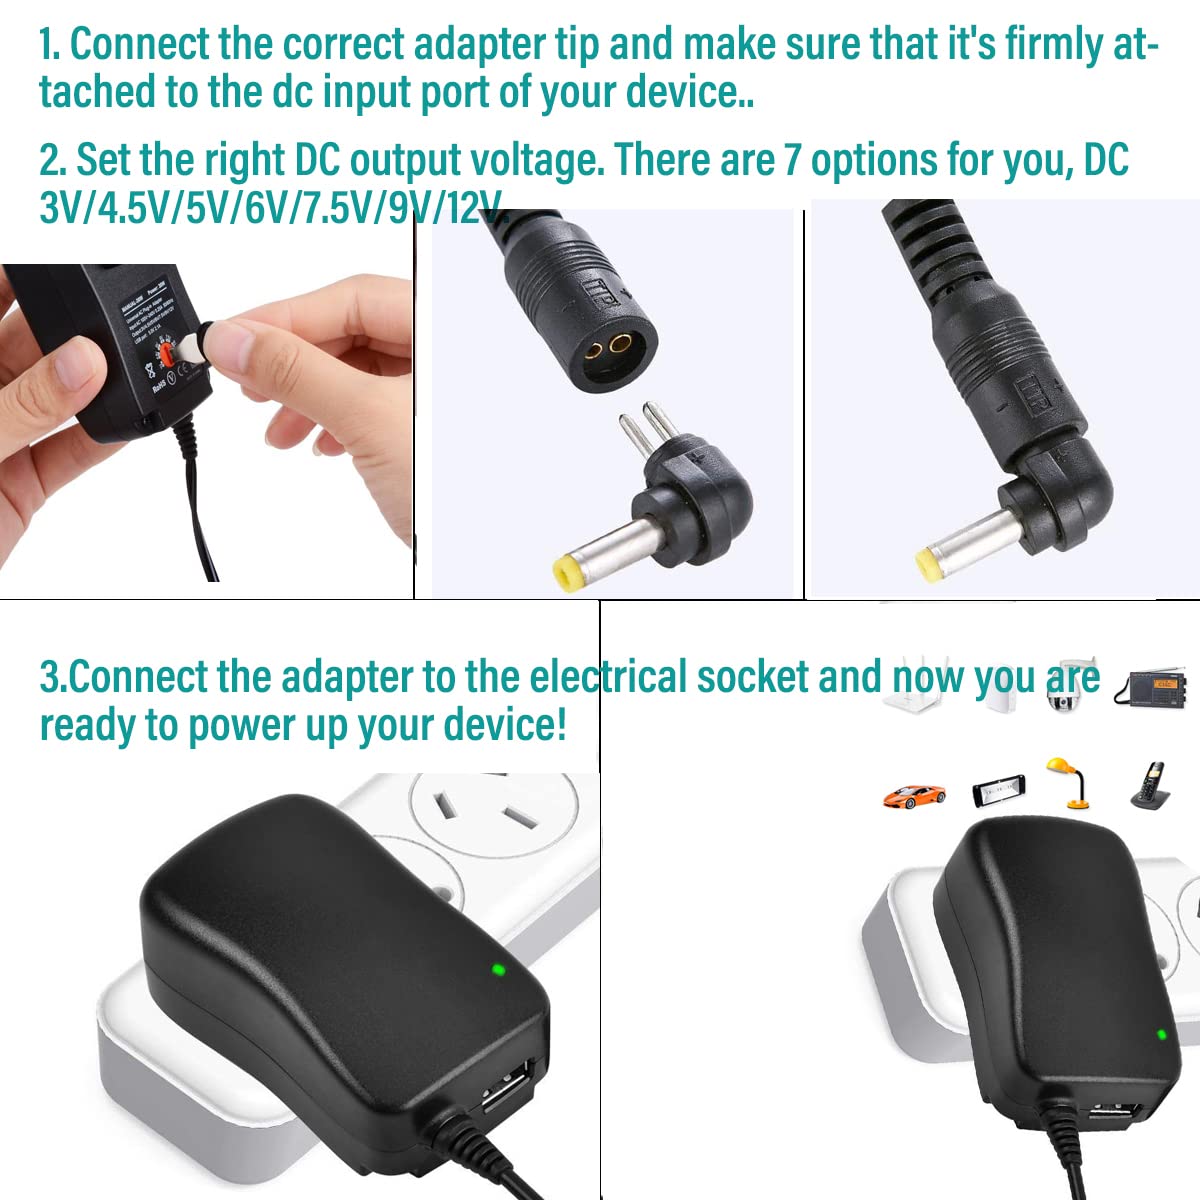 Check the power connection
Ensure that the power adapter is firmly plugged into the laptop and the power outlet.